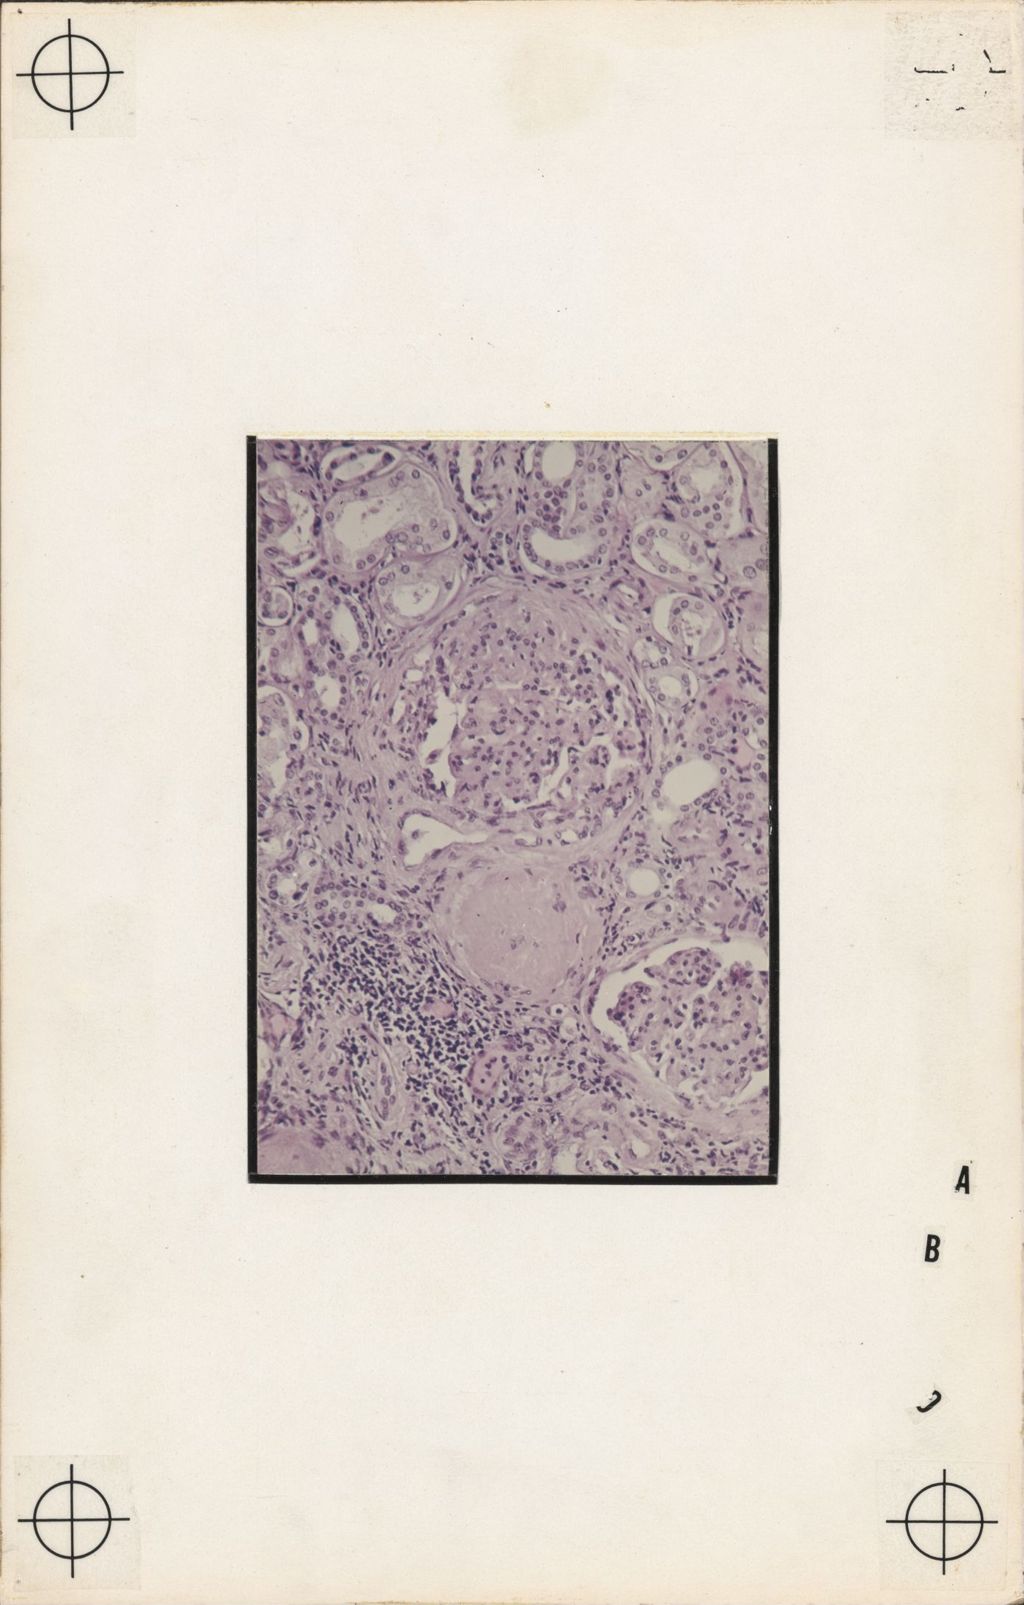 Miniature of Hypertension and the Kidney, Microscopic Portion of Glomerulonephritis